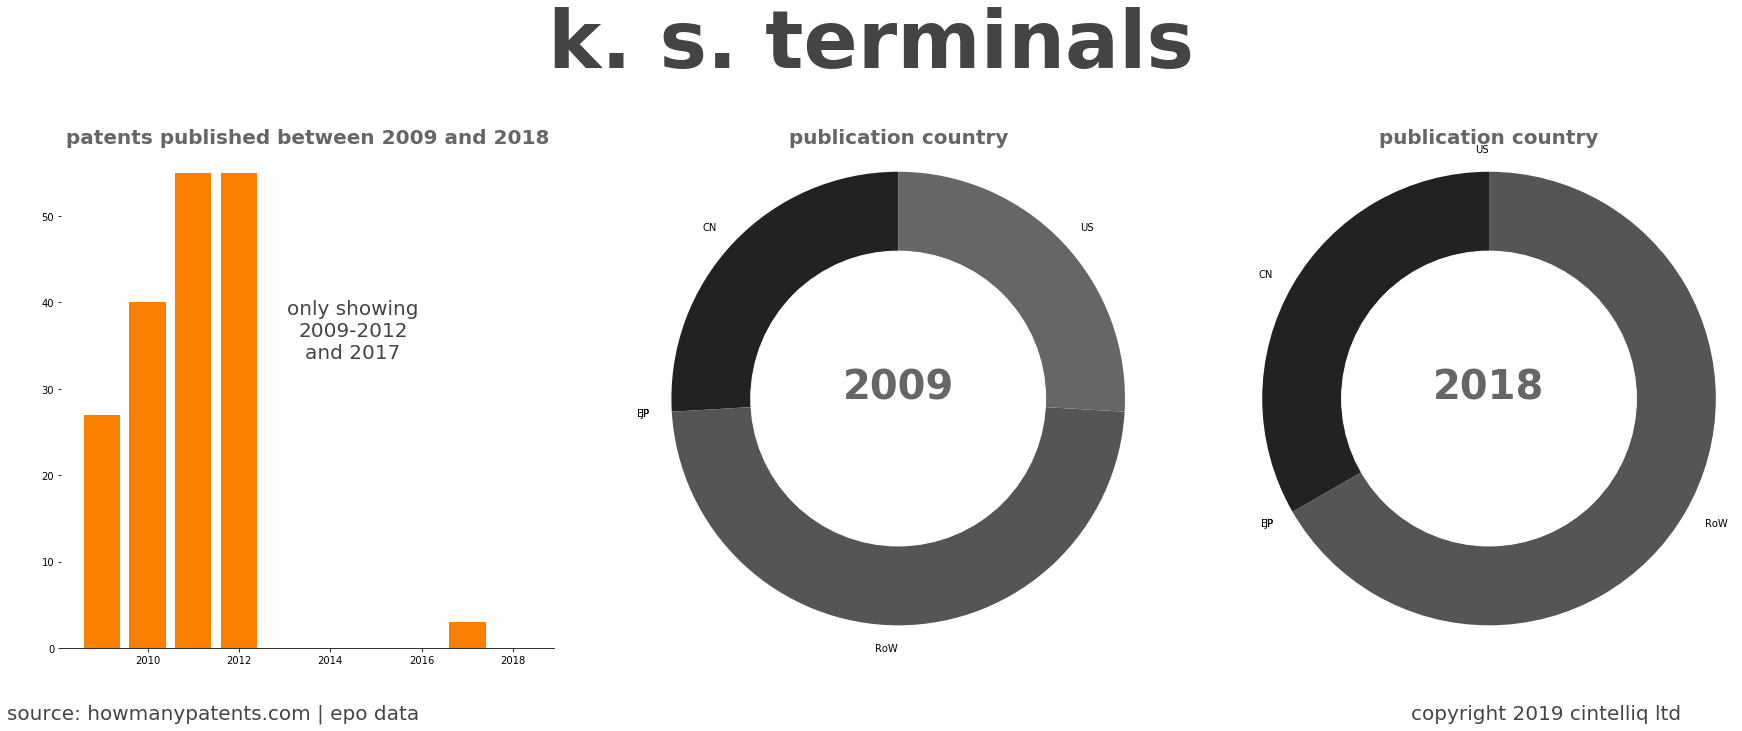 summary of patents for K. S. Terminals